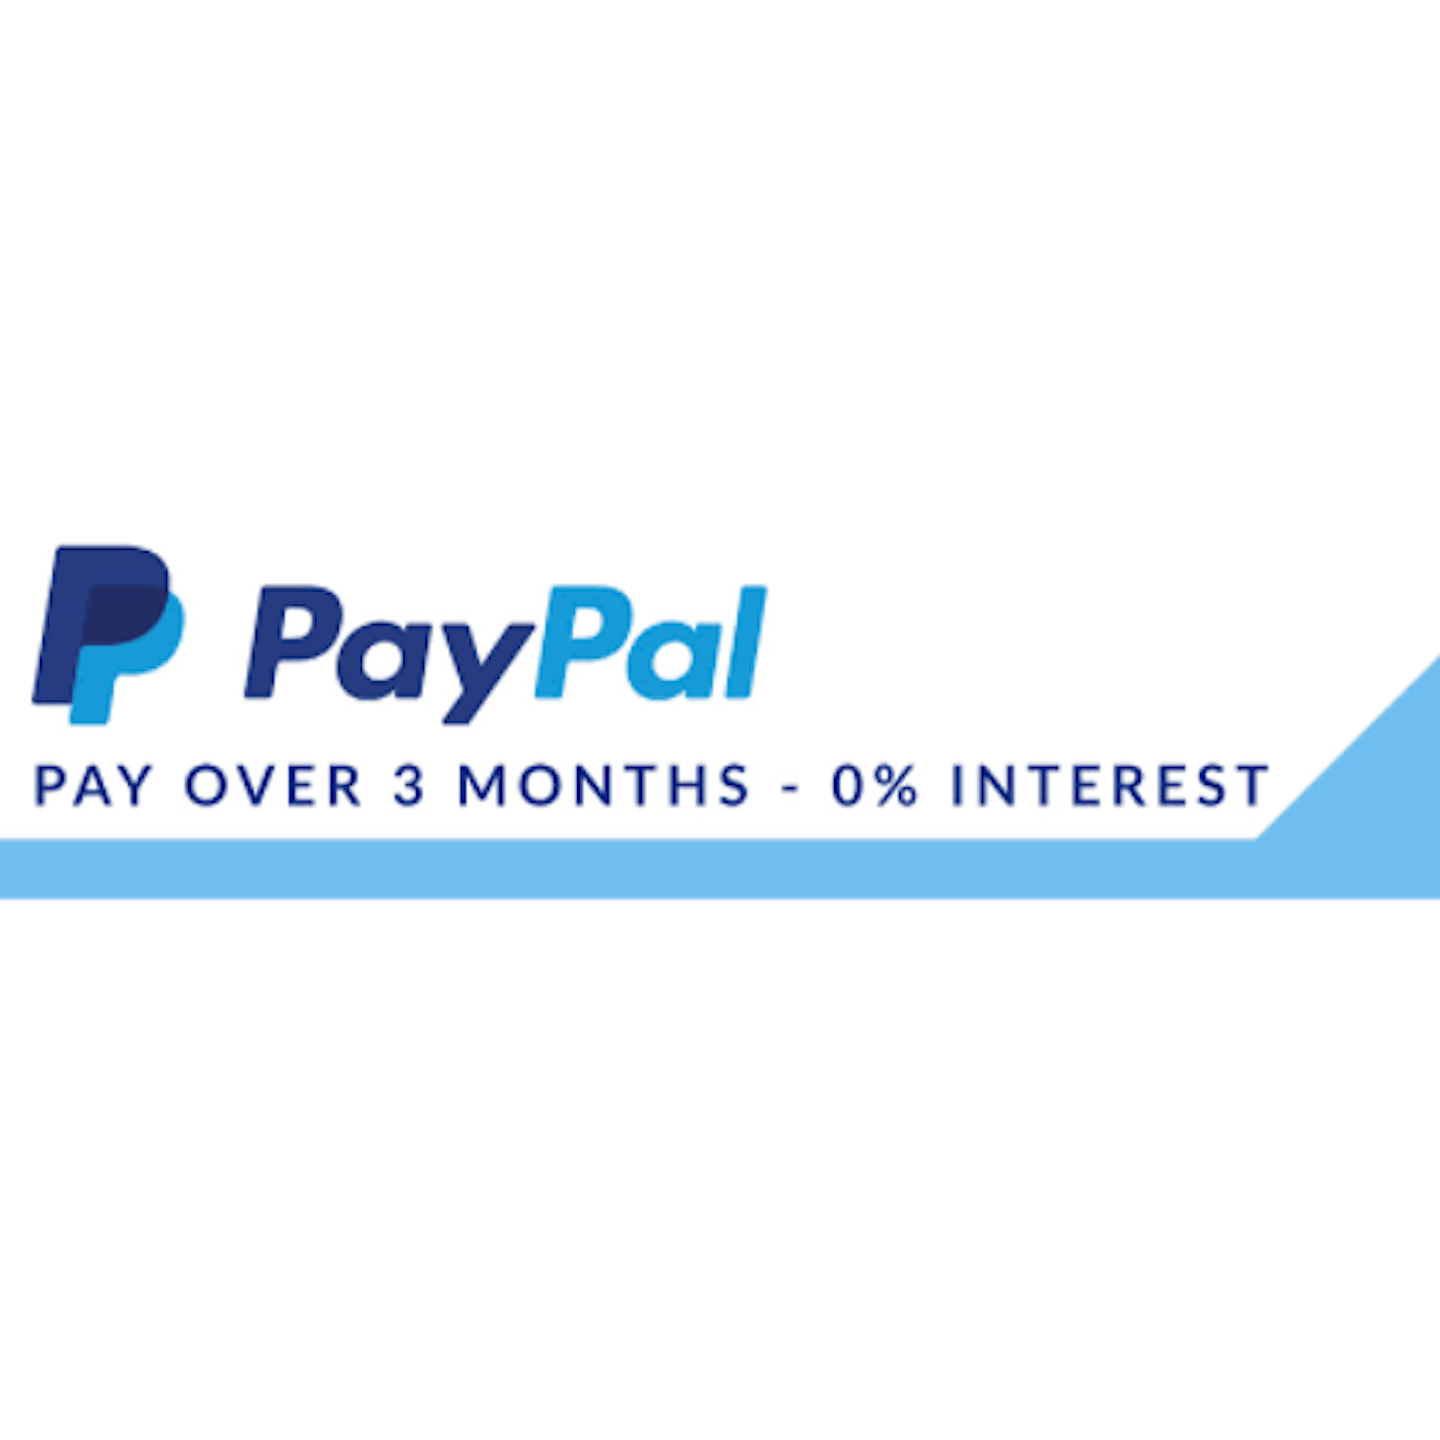 buy now pay later apps PayPal pay in 3